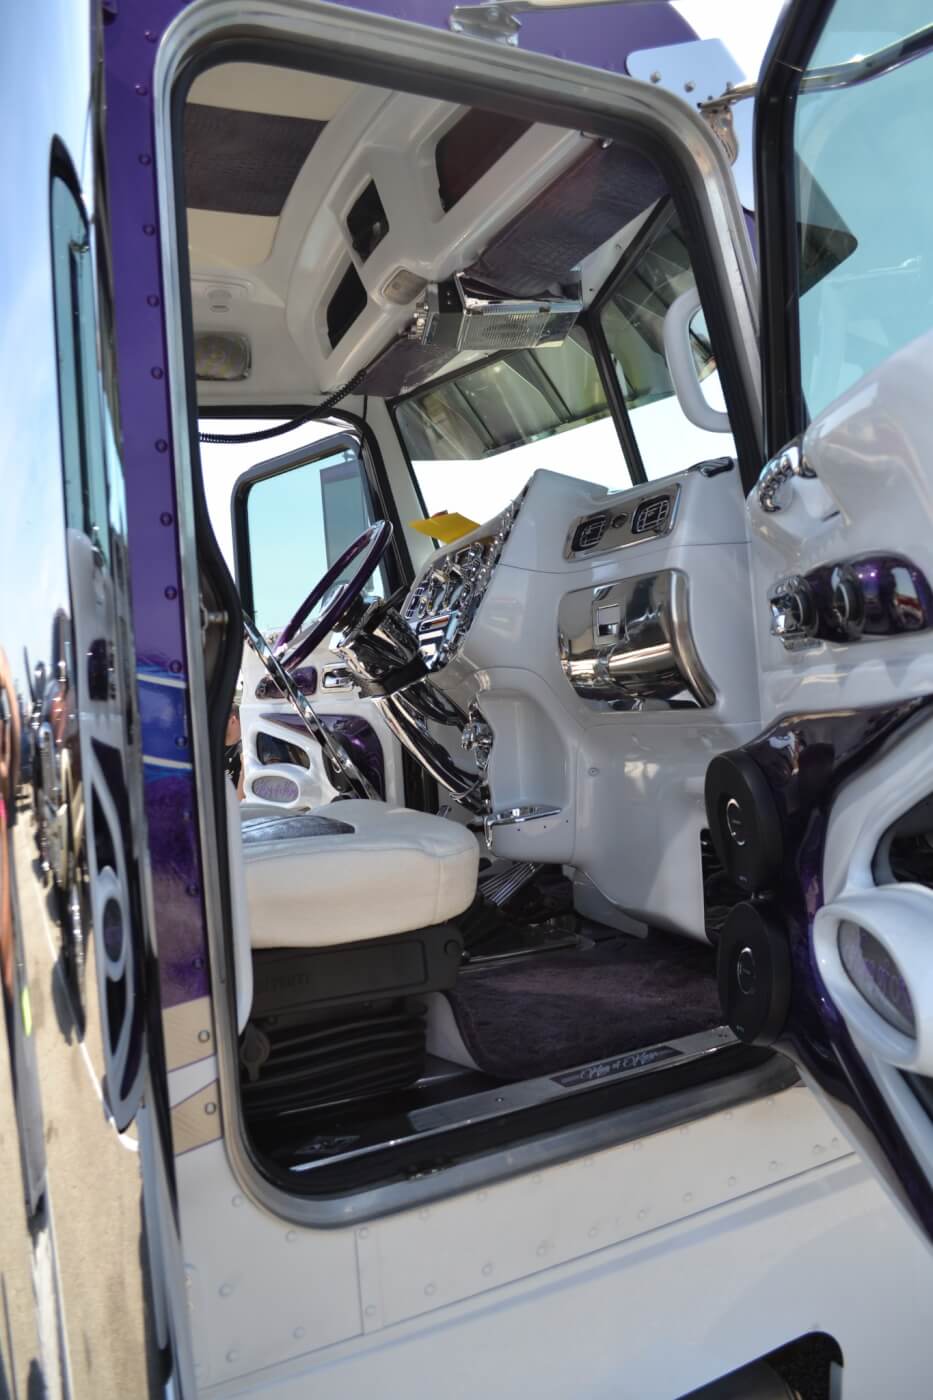 The show 'n shine wasn't just limited to pickups. If there was a "best interior" award, it would have gone to this white, purple, and chrome big rig.